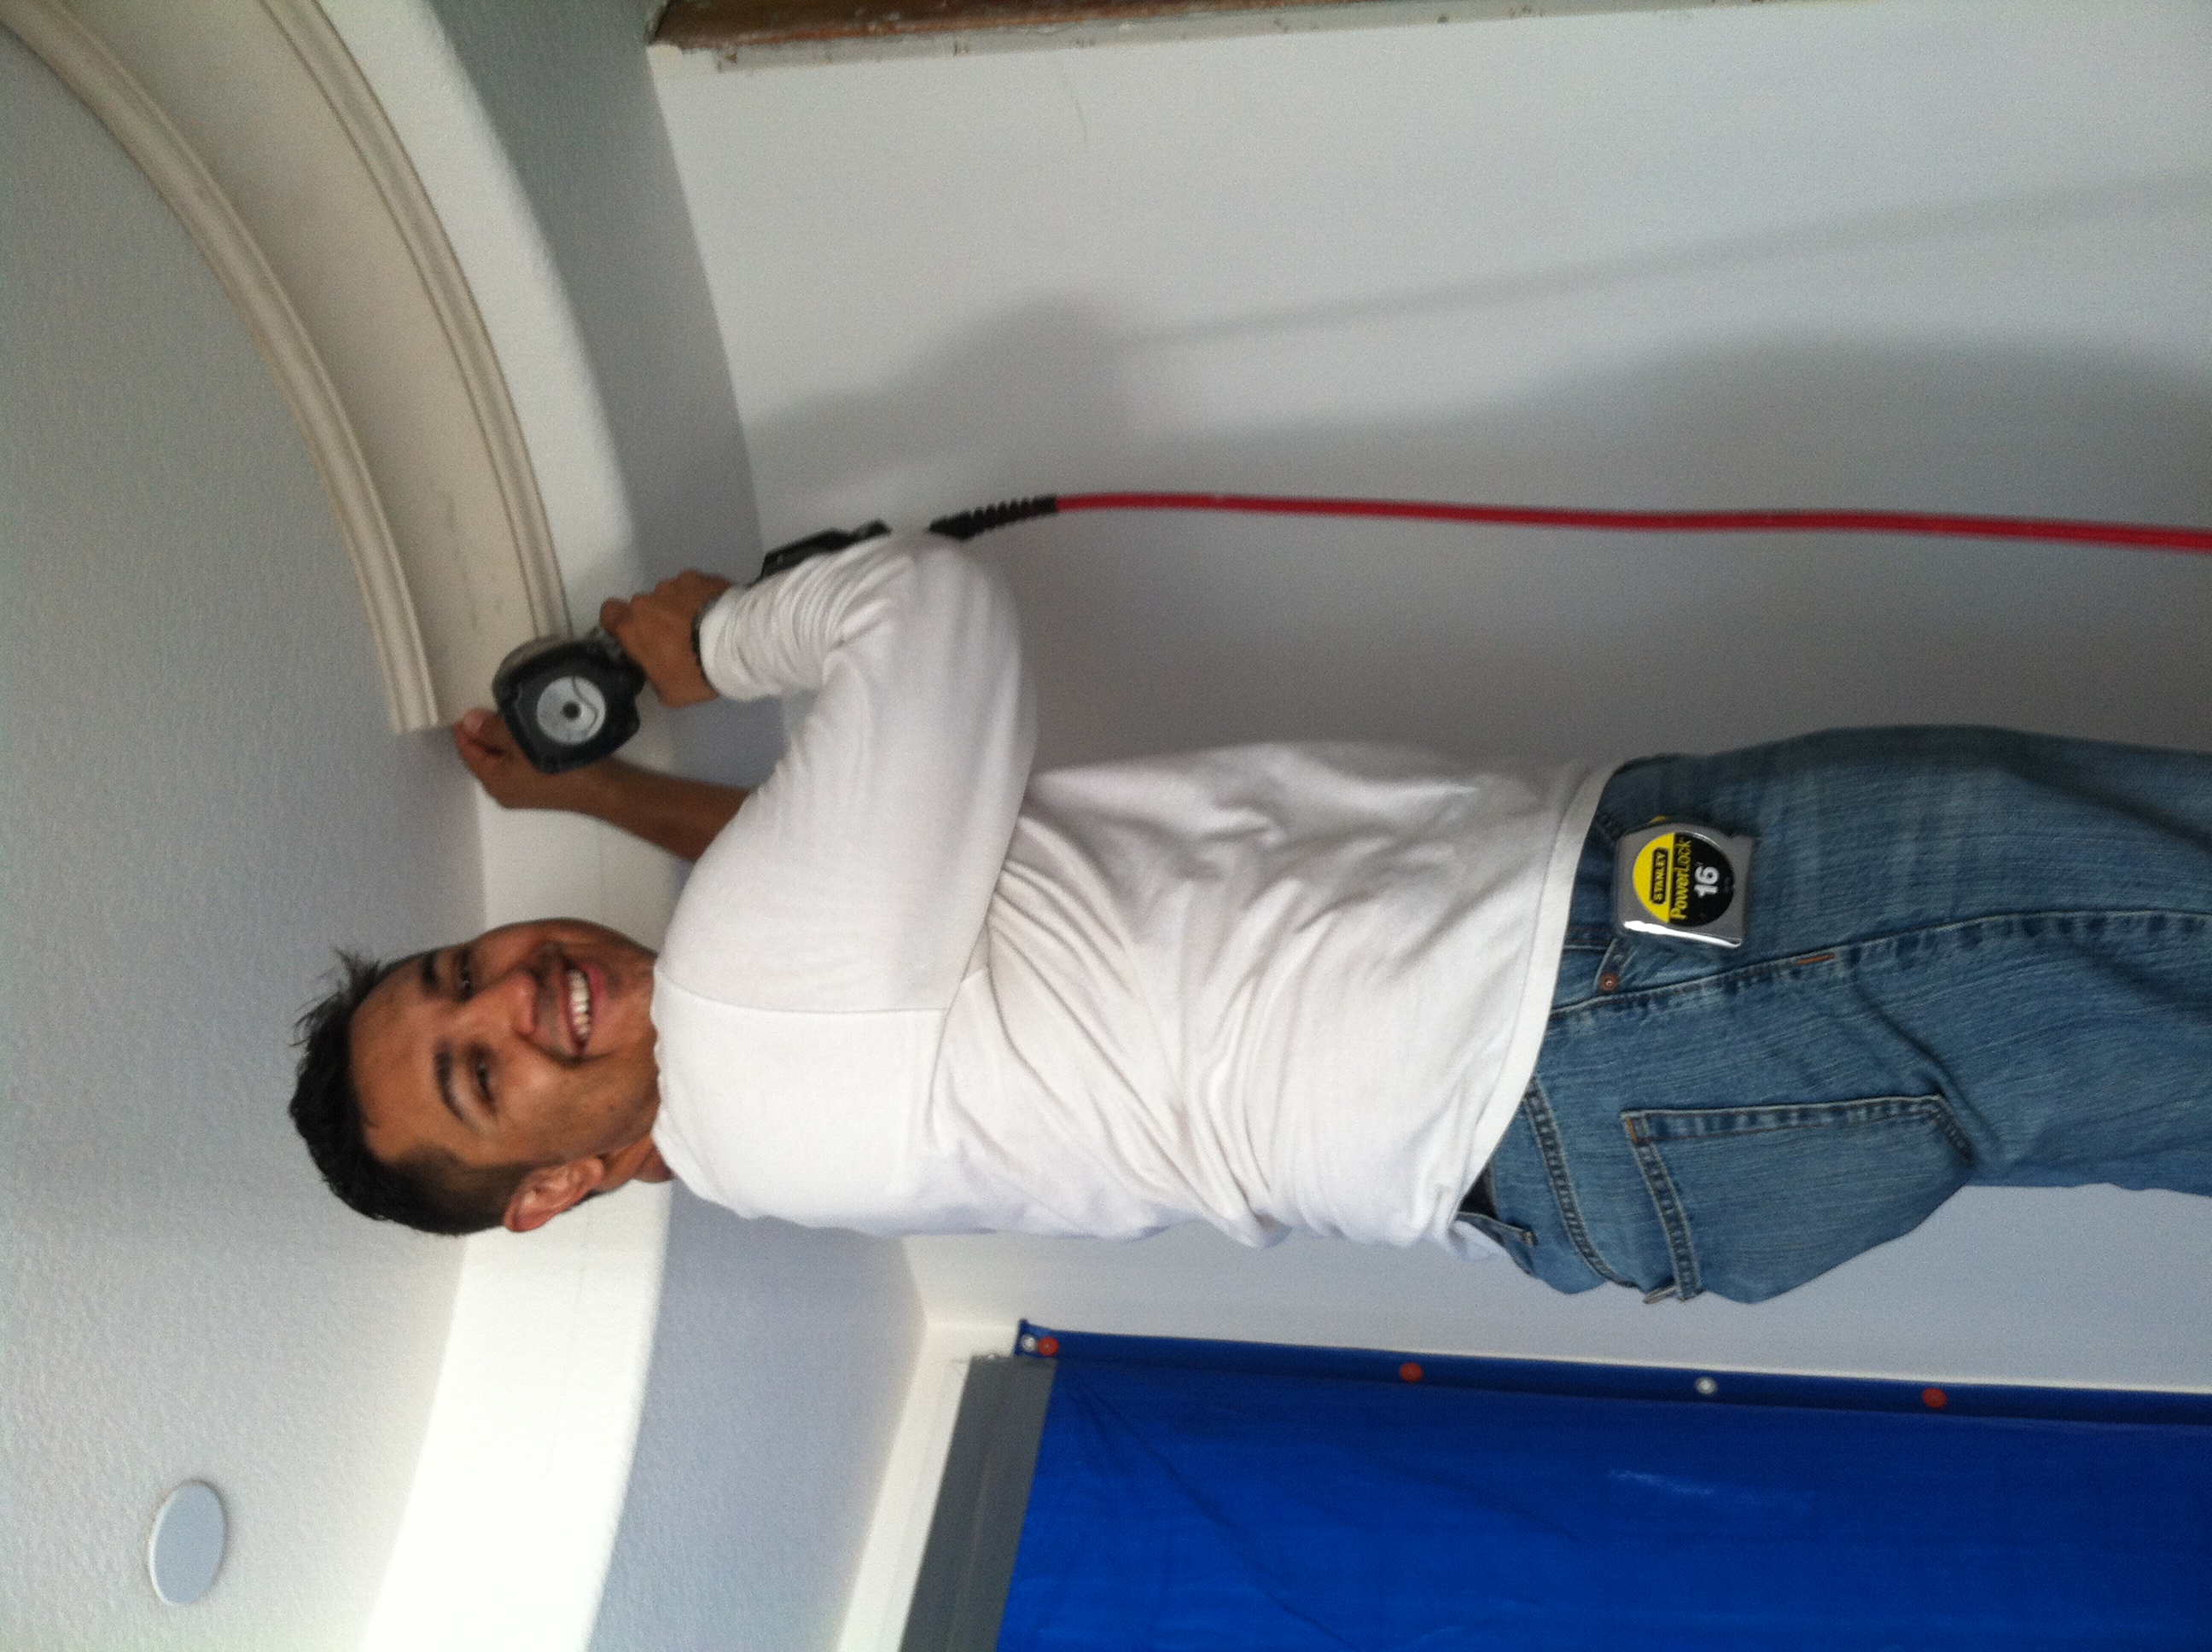 <img src="Mike1.jpg" alt="Mike Urquizo on a ladder using power tools">